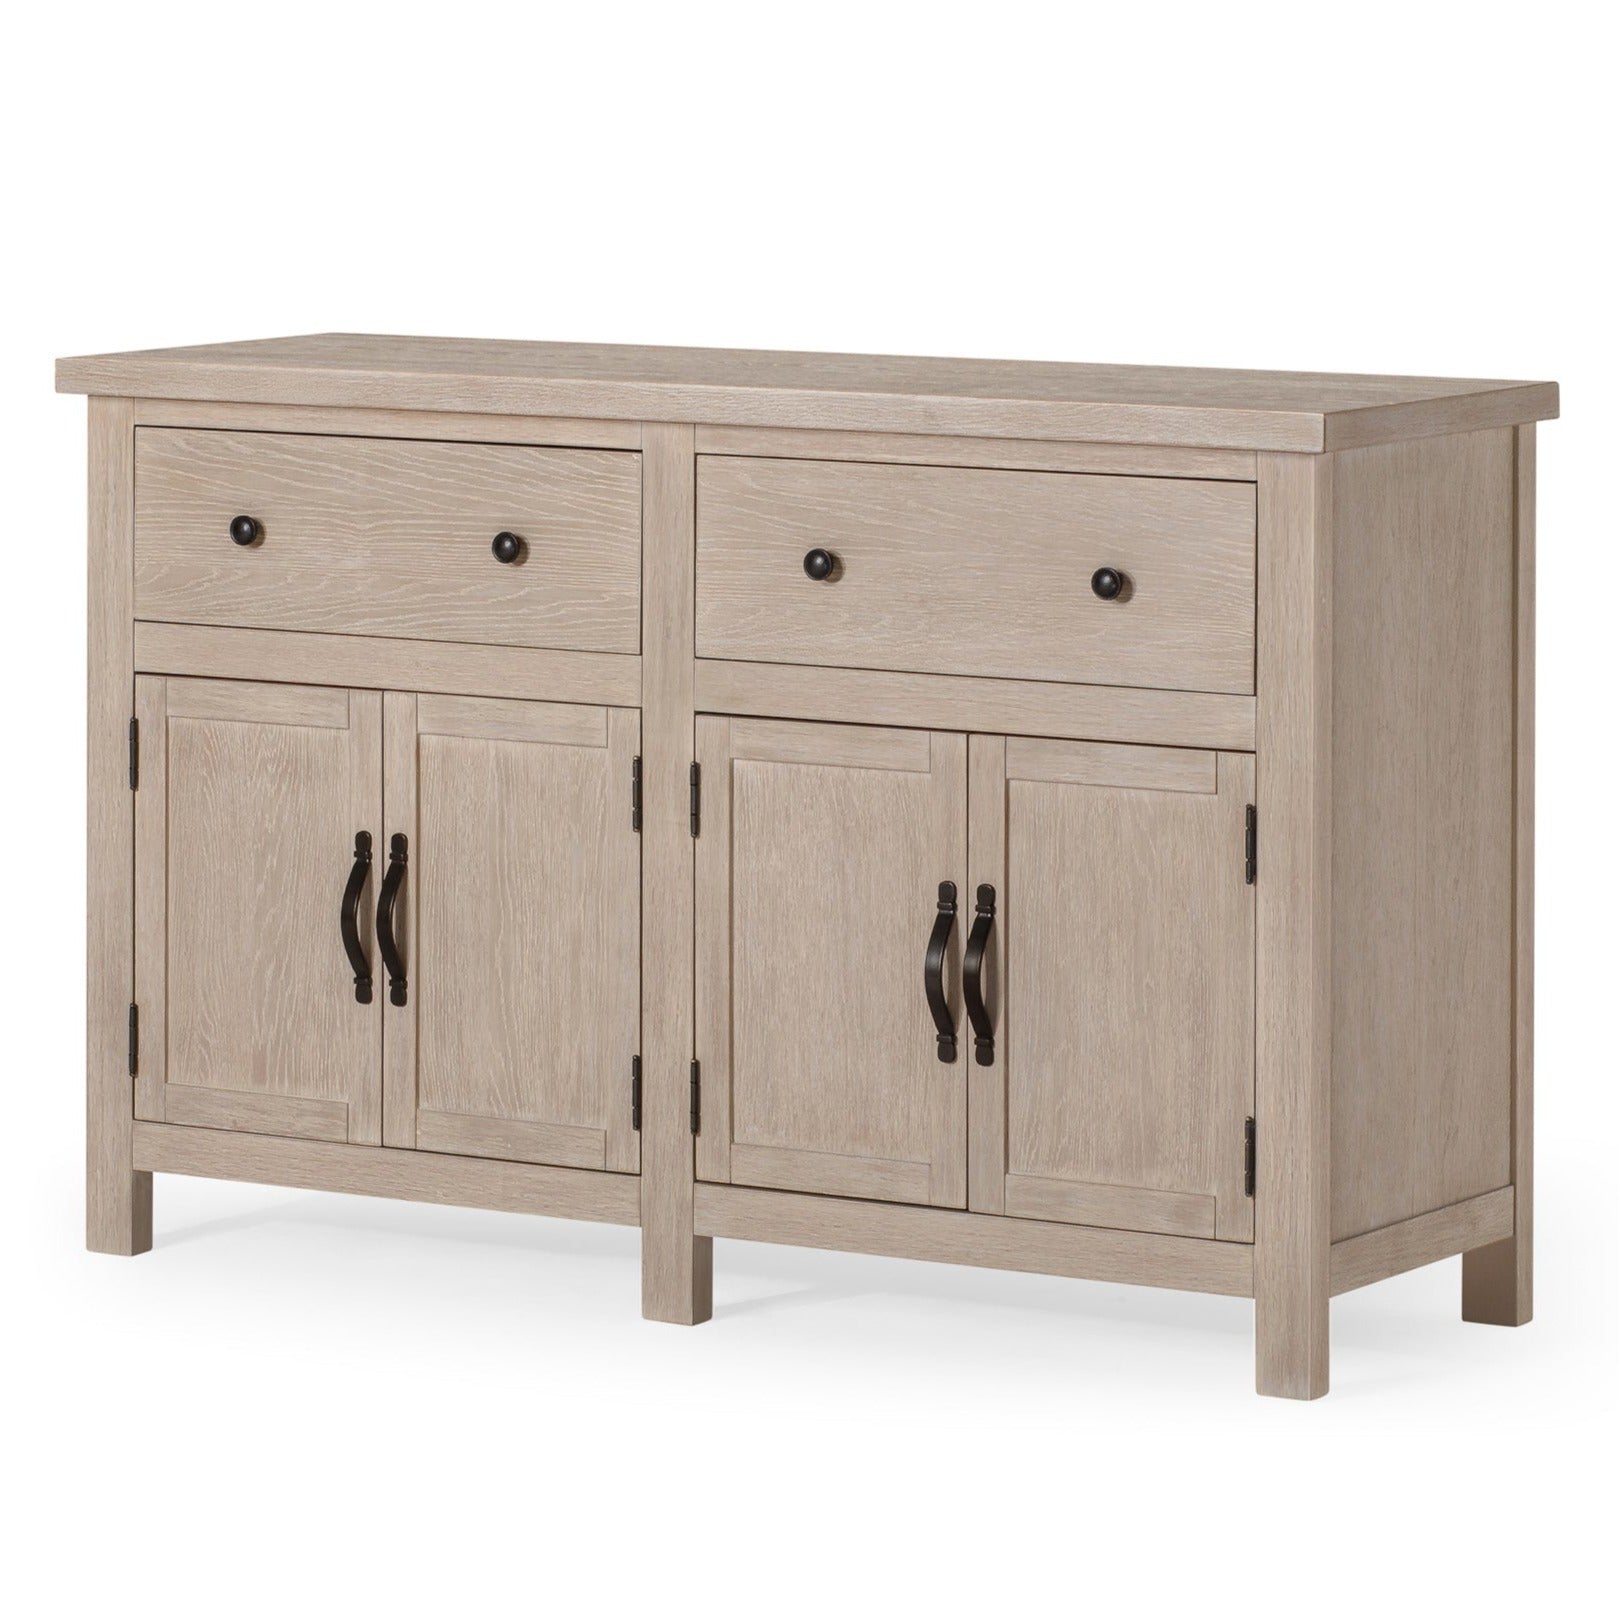 Felix Organic Wooden Sideboard in Weathered White Finish in Cabinets by Maven Lane